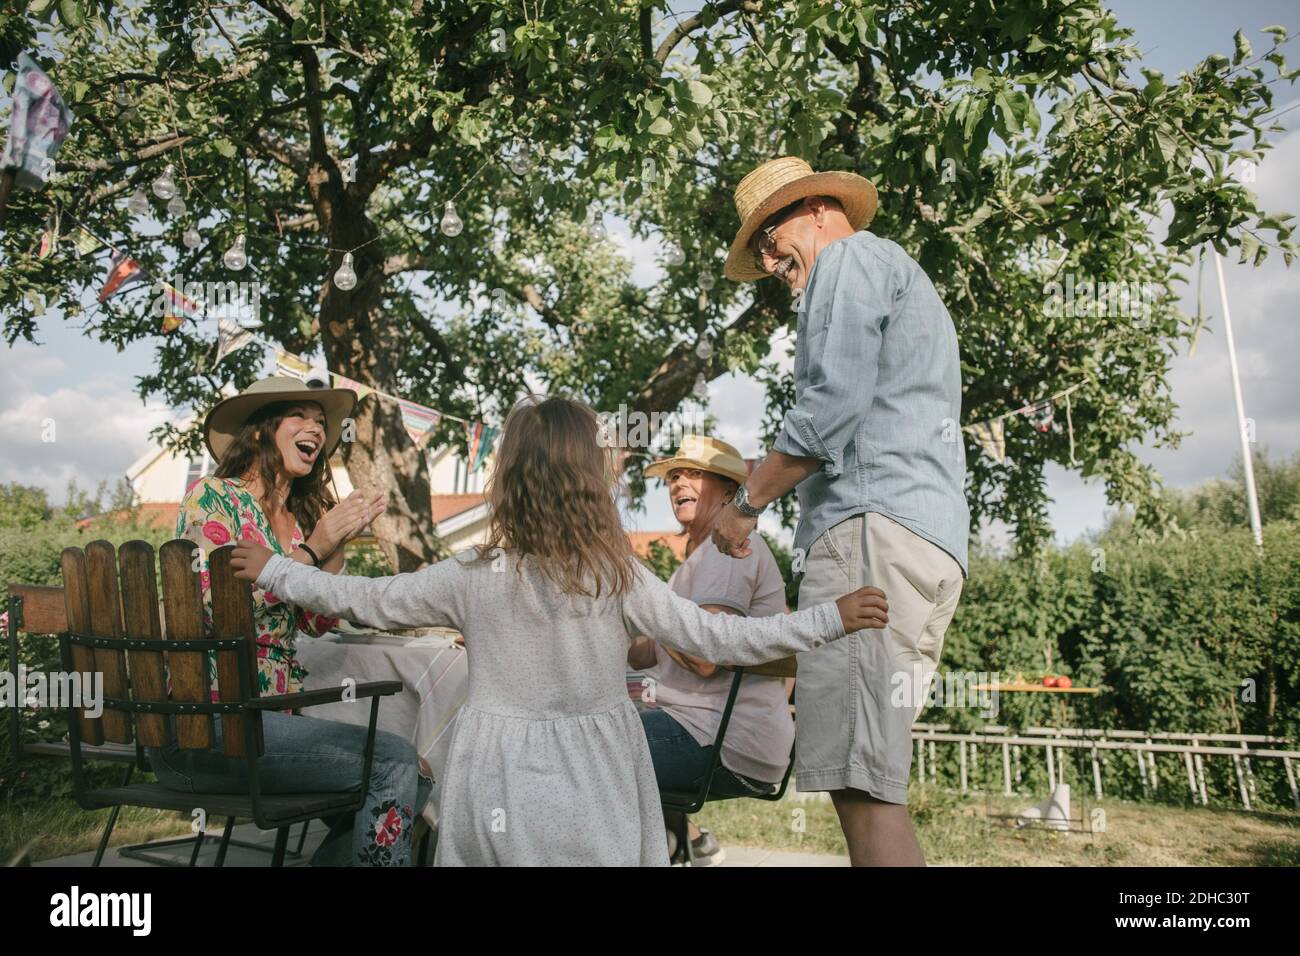 Family applauding while looking at senior man and girl dancing during garden party Stock Photo